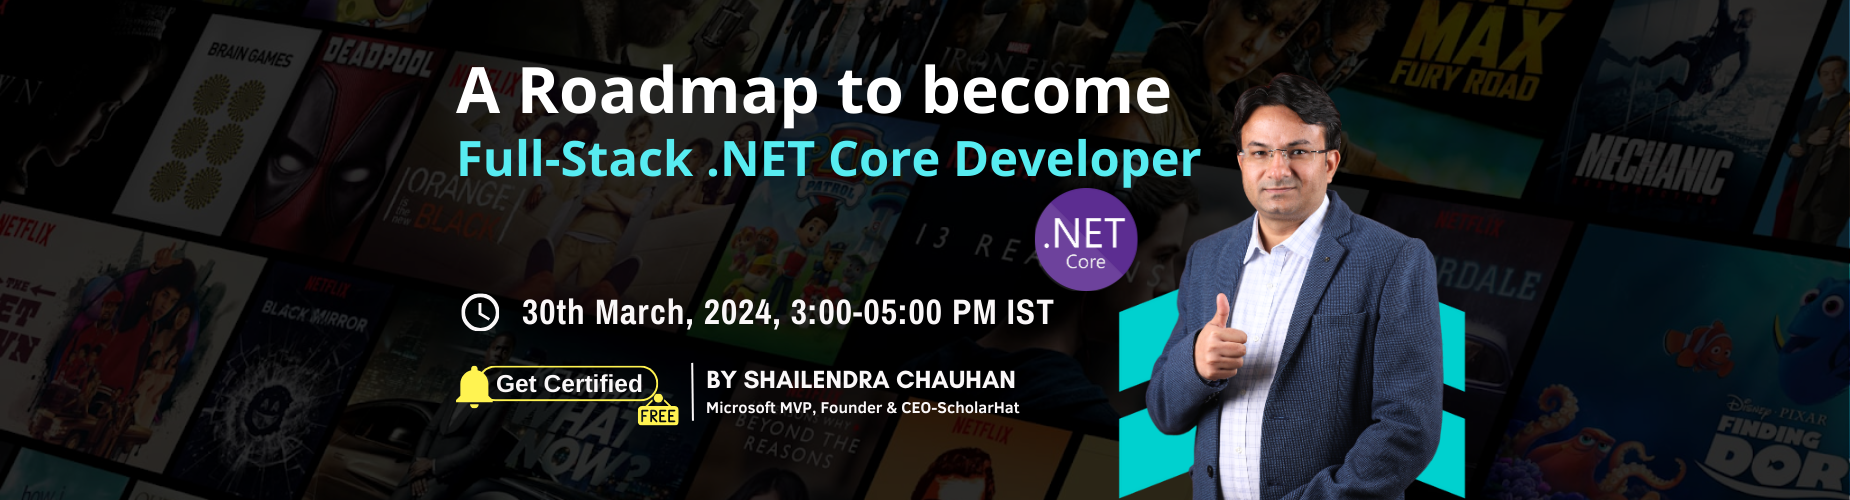 A Roadmap to Become Full-Stack .NET Core Developer